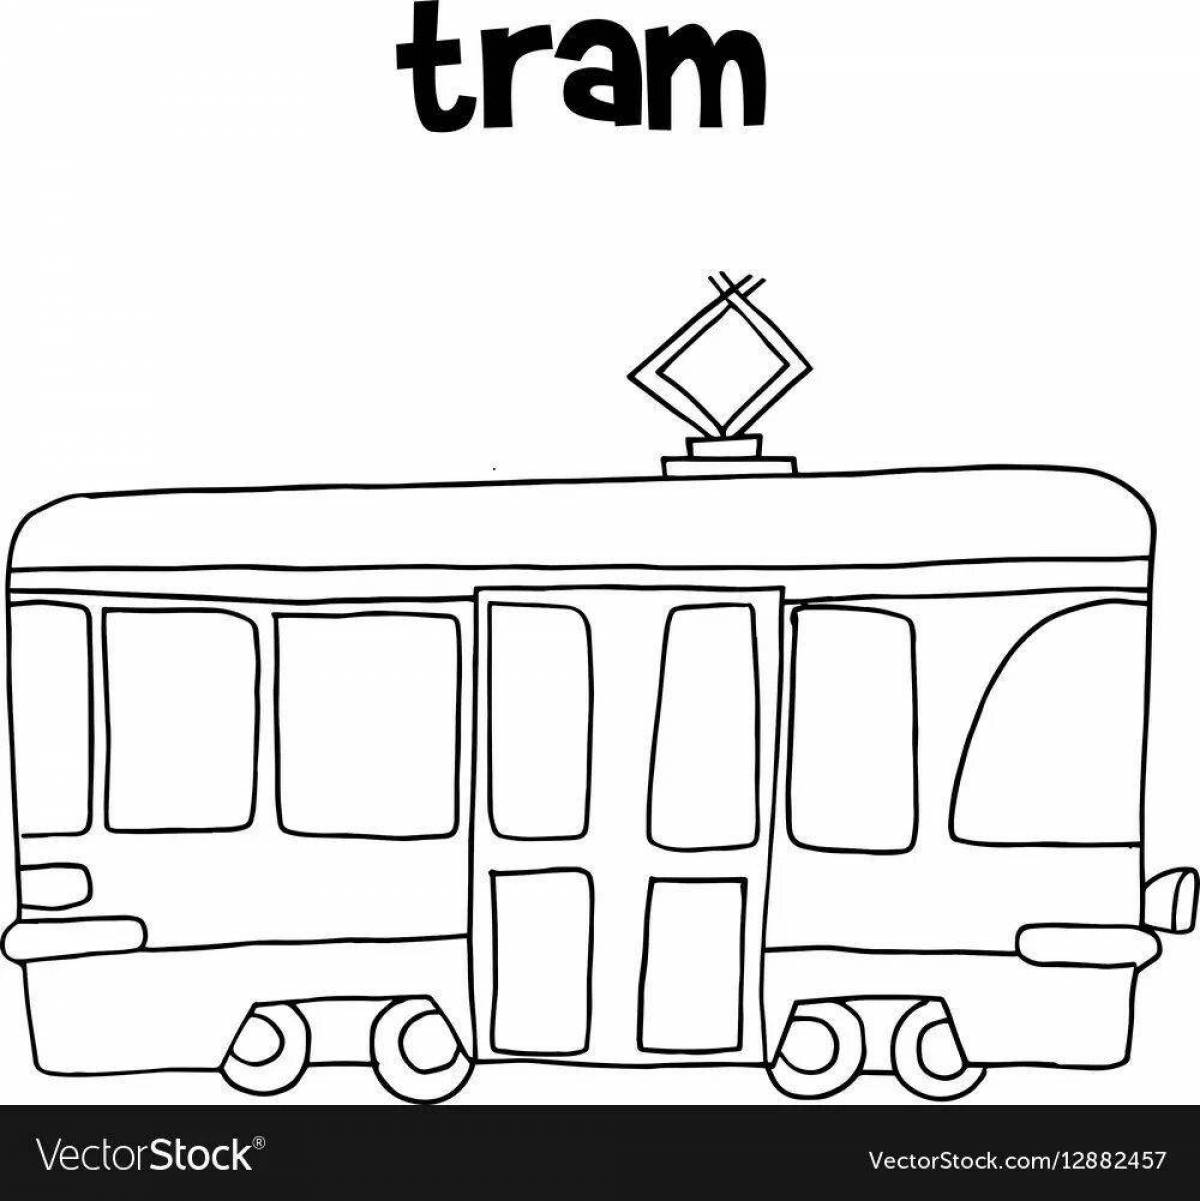 Exciting tram coloring for kids